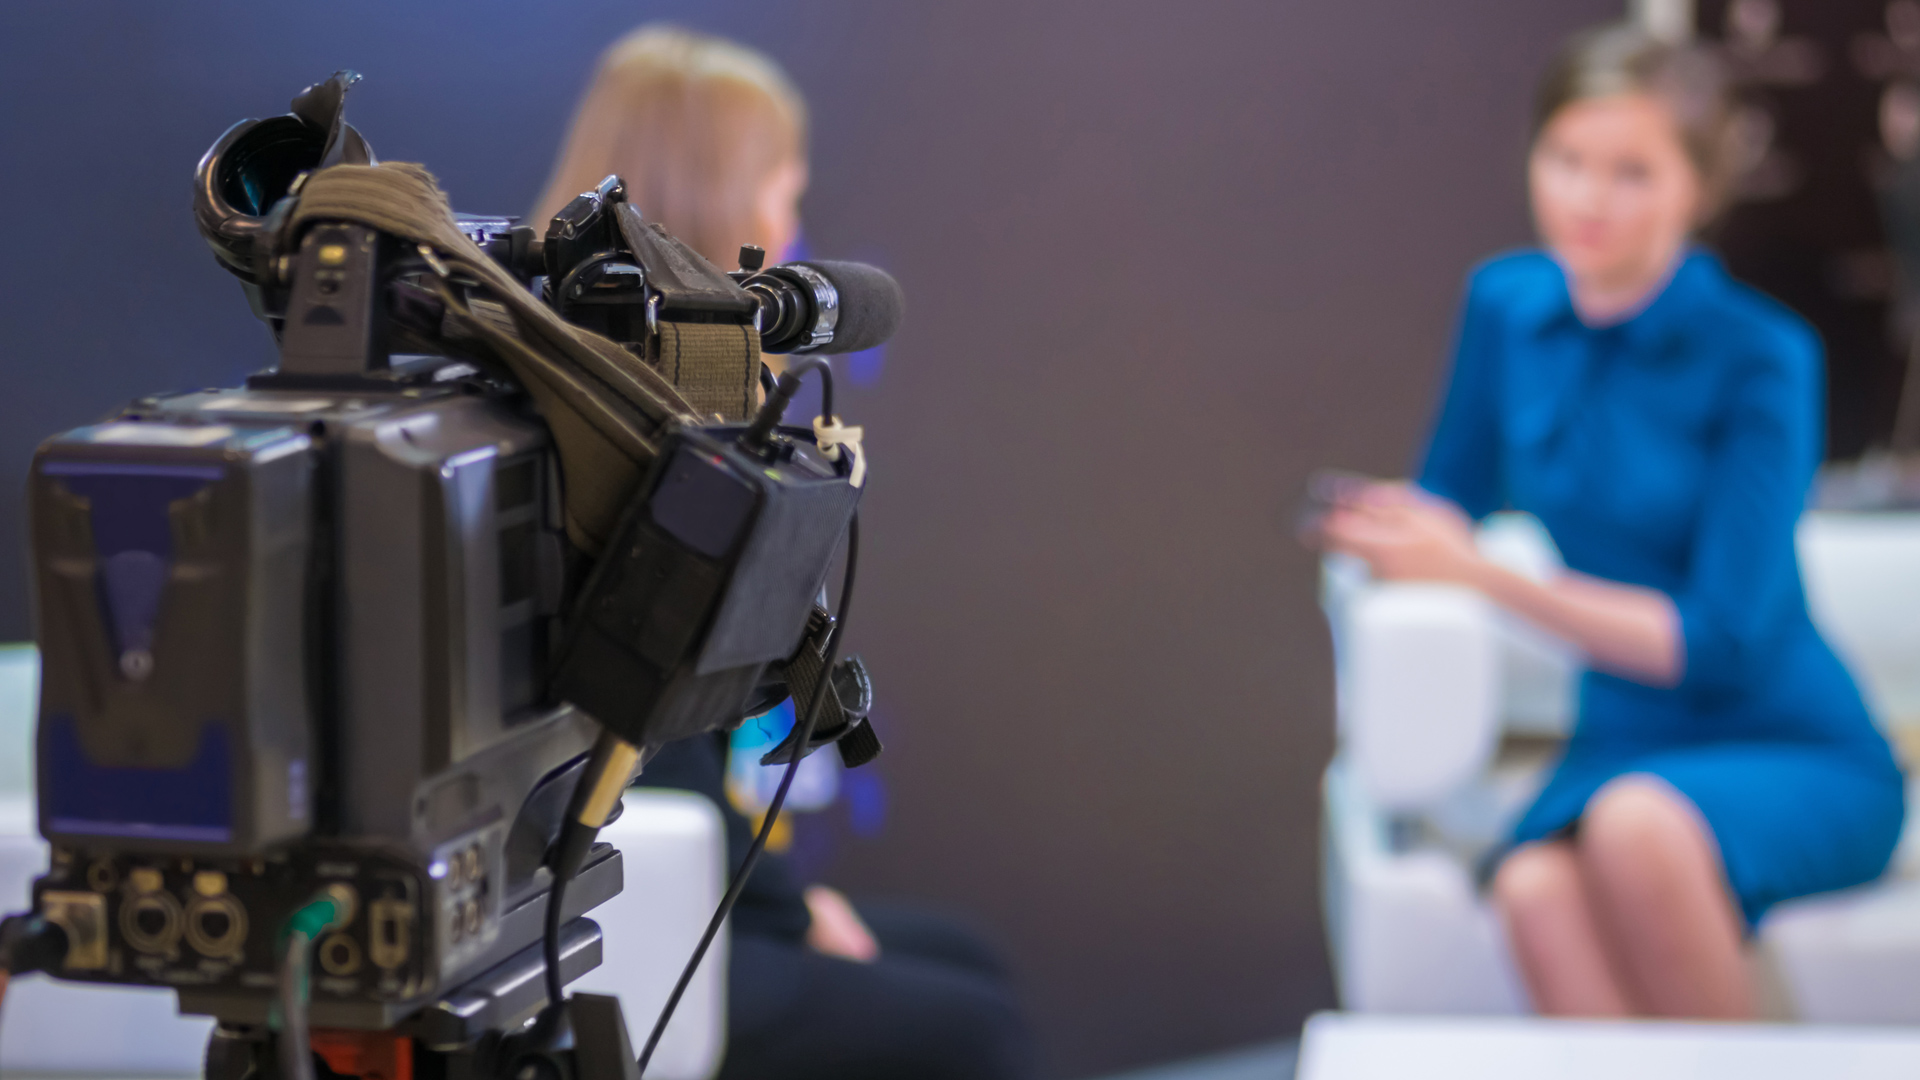 In-person Media Interviews Are Back (If You’re Prepared) - photo of a video camera filming a TV interview between two female participants